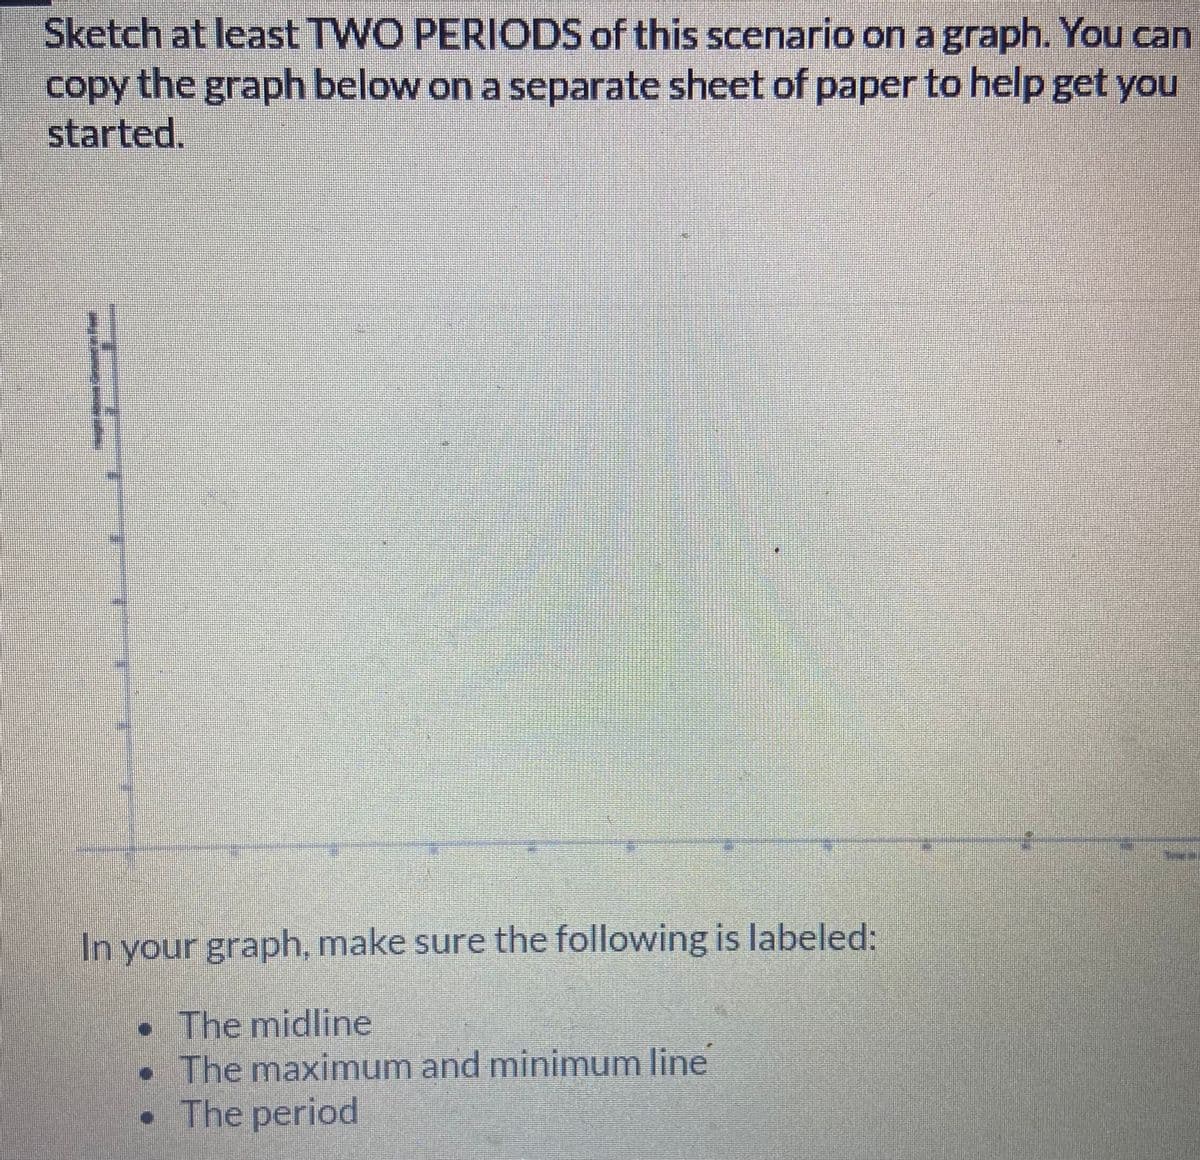 Sketch at least TWO PERIODS of this scenario on a graph. You can
copy
the graph below on a separate sheet of paper to help get you
started.
In your graph, make sure the following is labeled:
• The midline
• The maximum and minimum line
• The period
